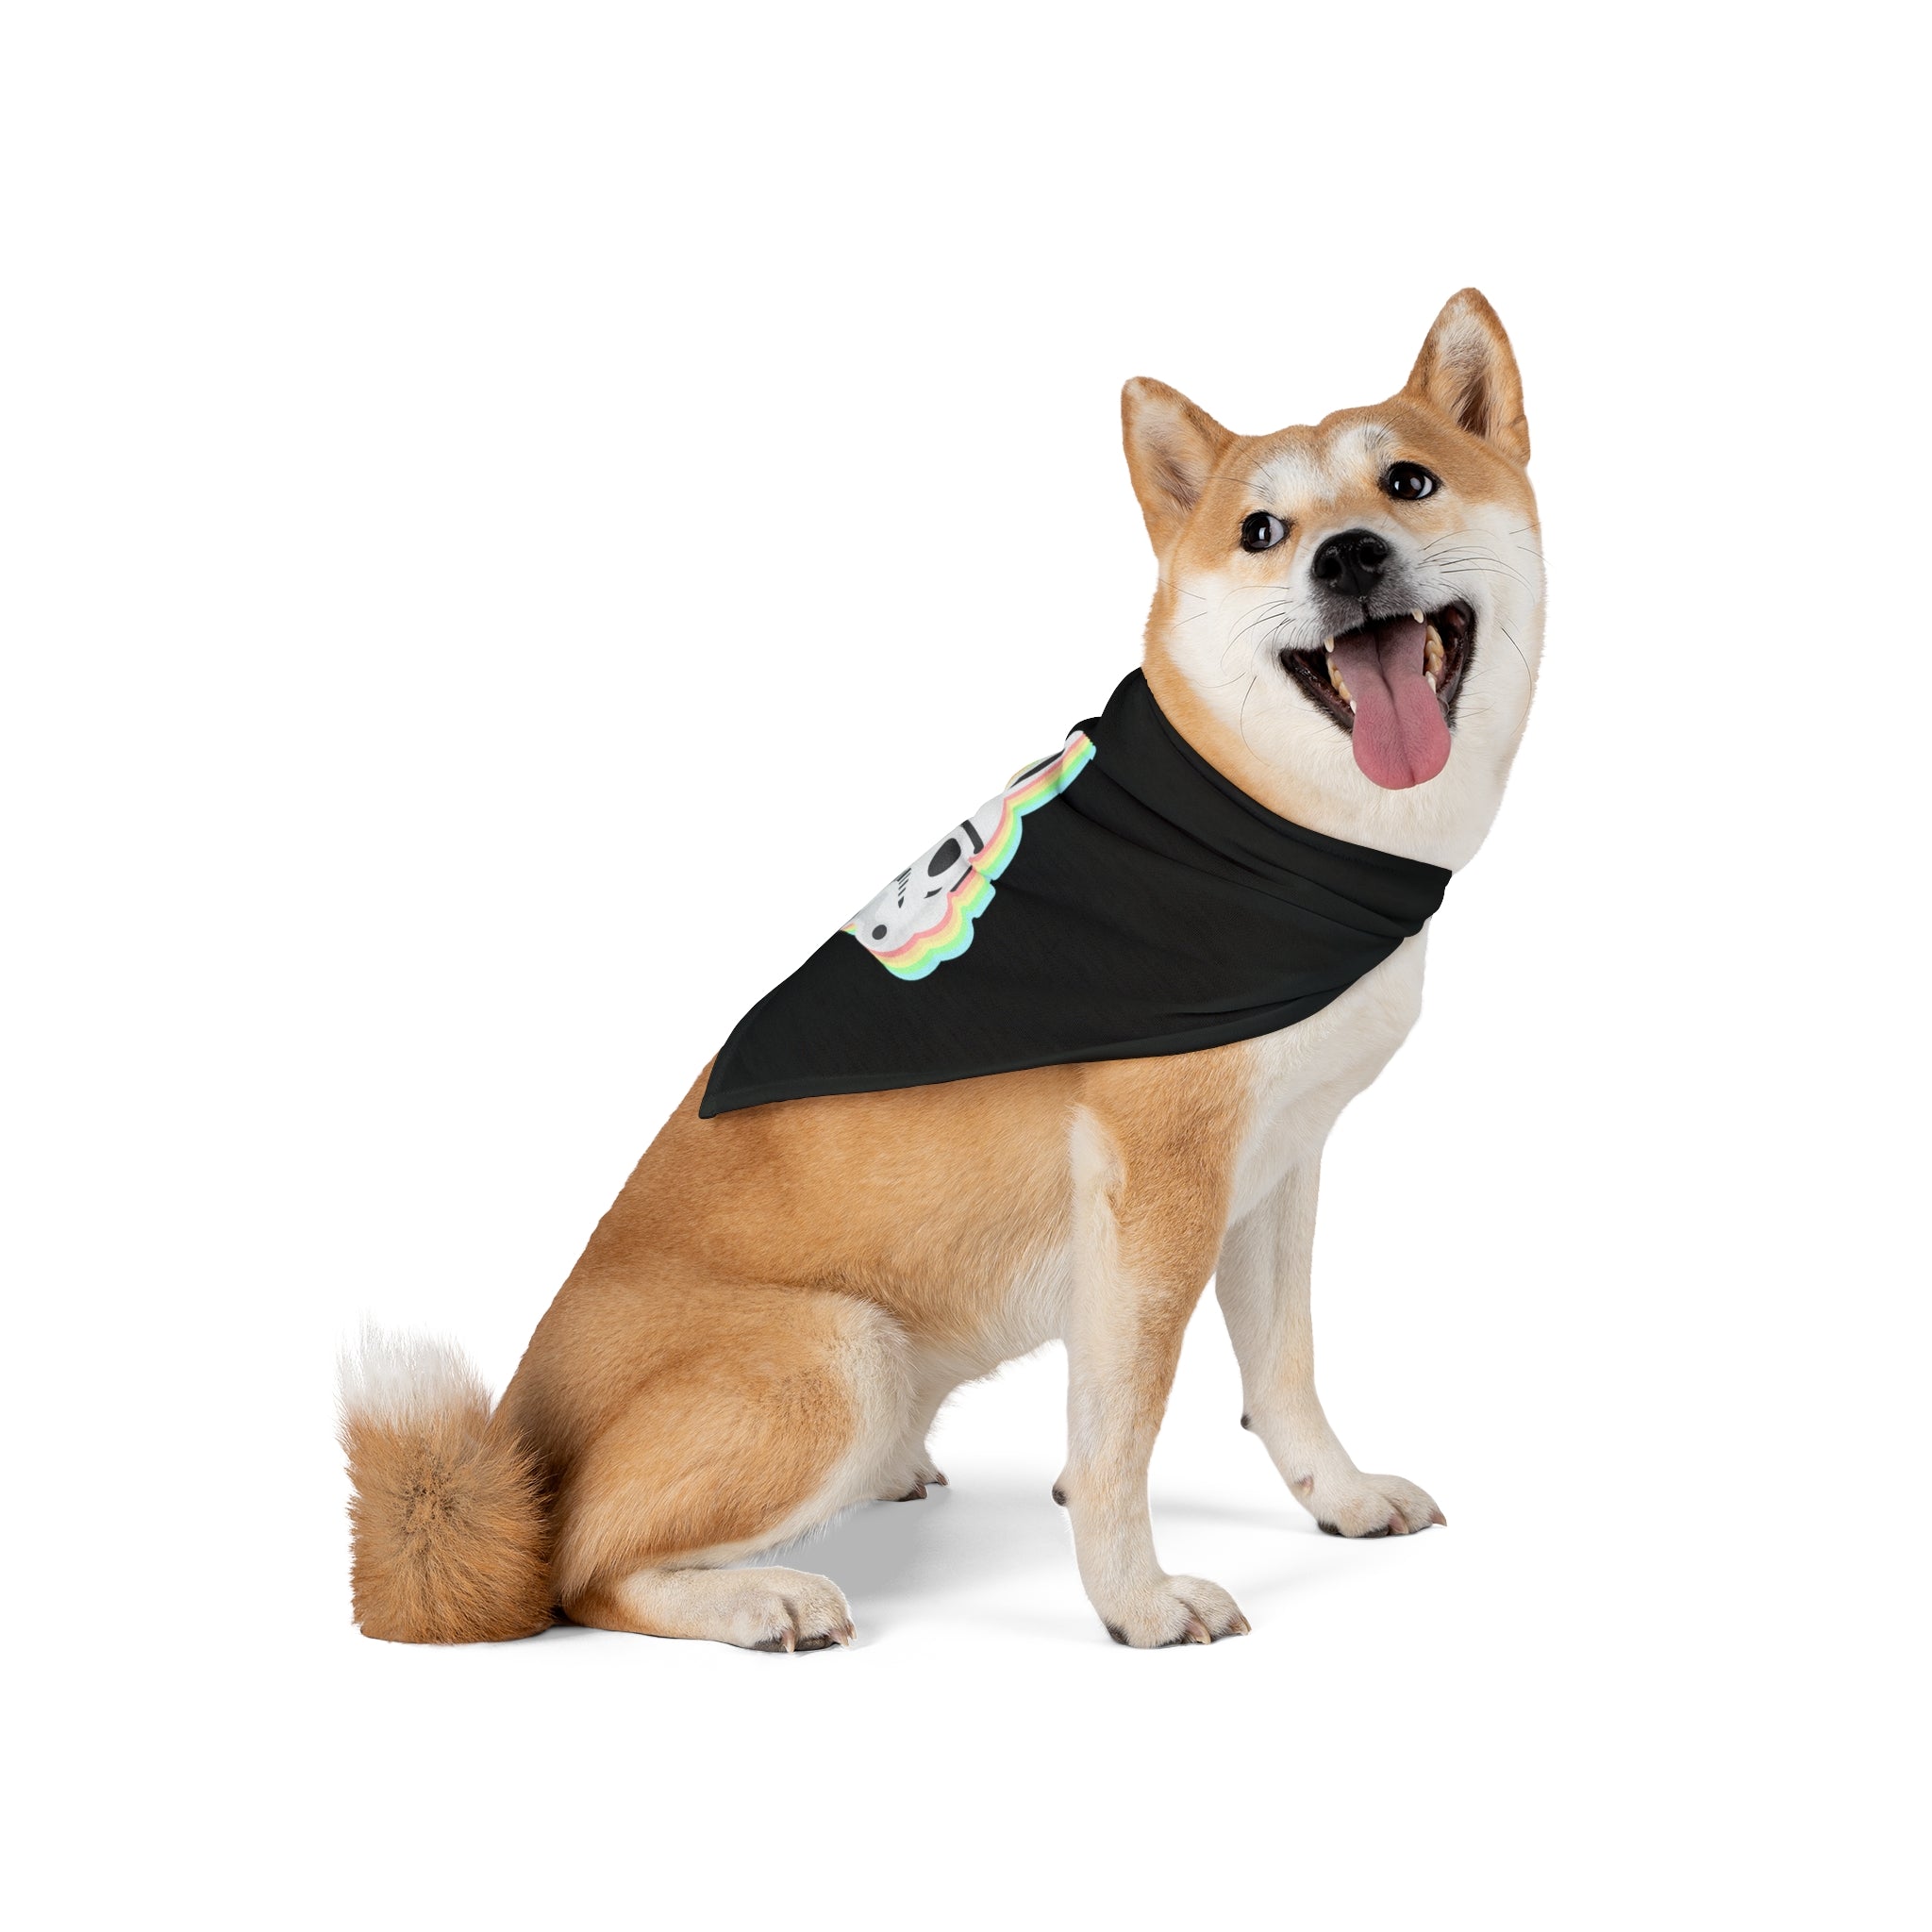 A Shiba Inu dog is sitting, wearing a Star Wars Easter Stormtrooper - Pet Bandana. The dog has its tongue out and ears perked, looking happy like an Easter Stormtrooper enjoying the day.